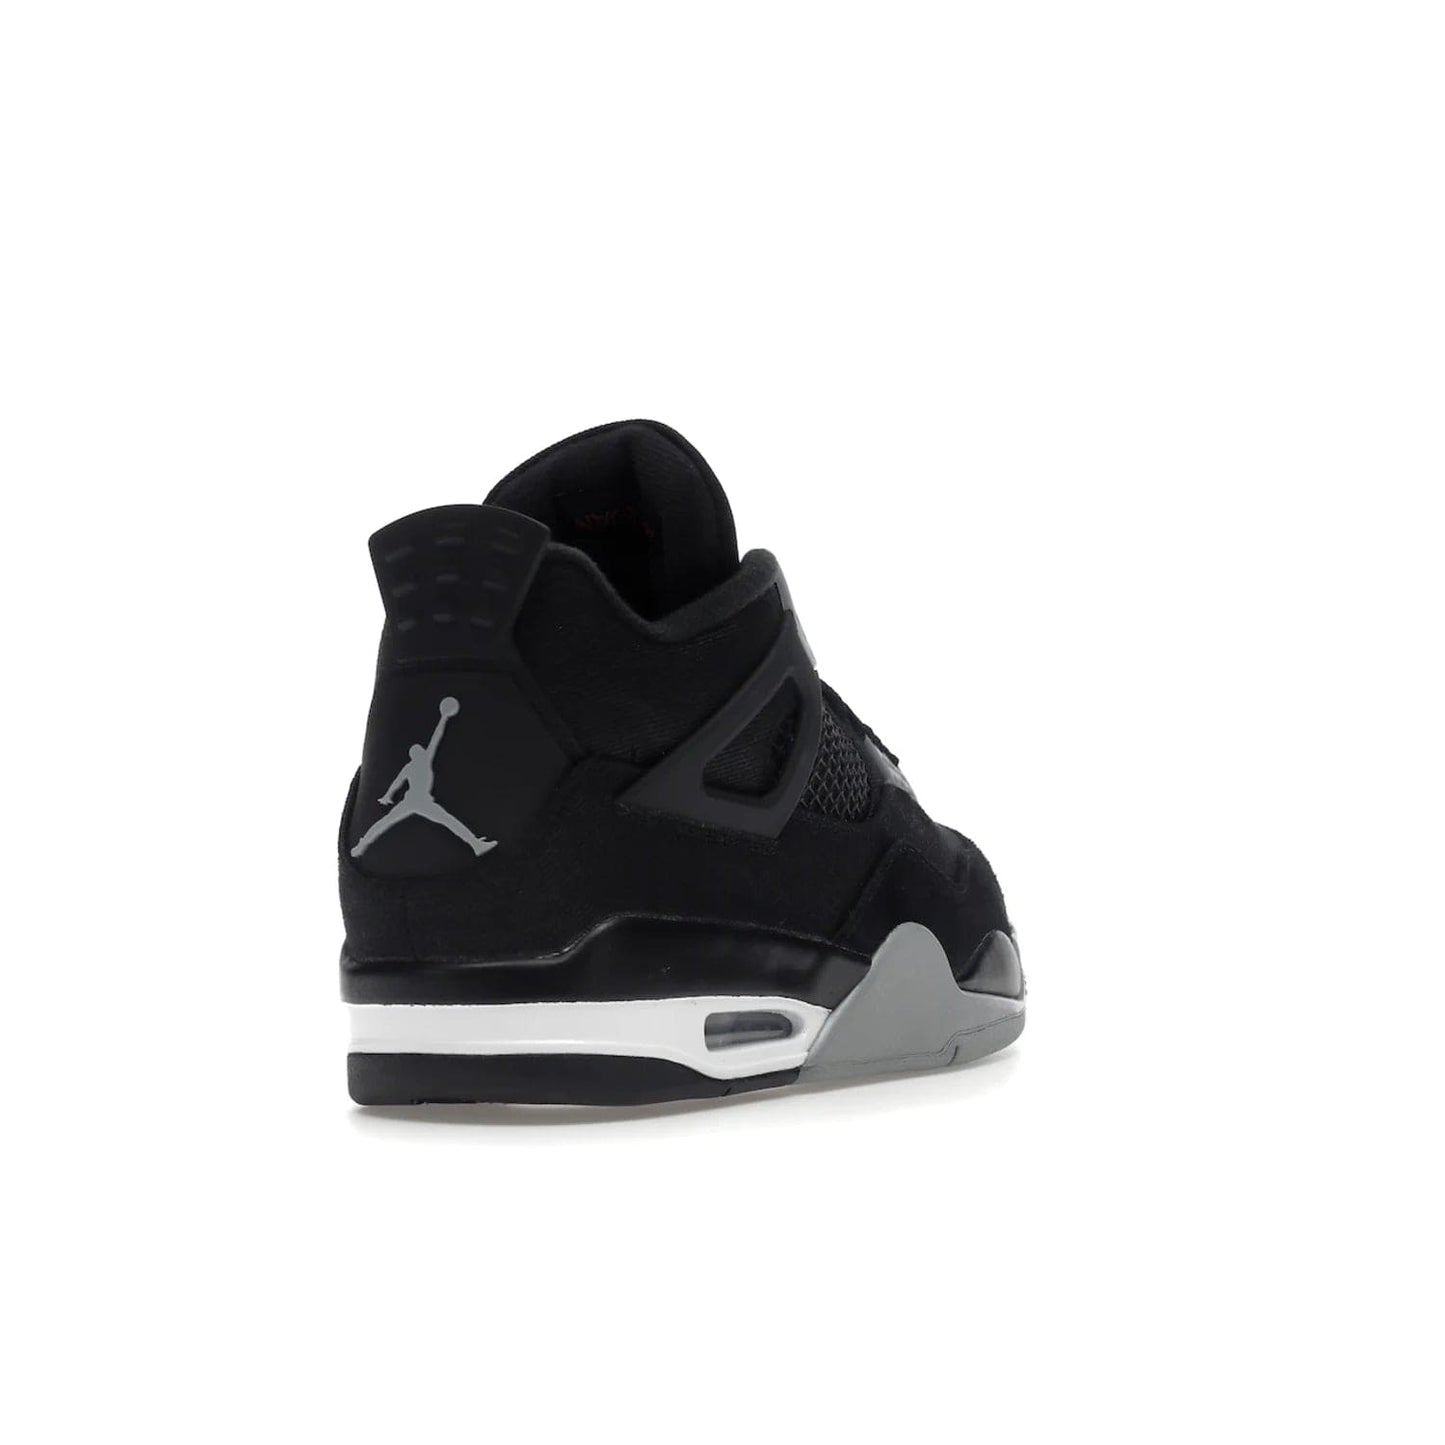 Jordan 4 Retro SE Black Canvas - Image 31 - Only at www.BallersClubKickz.com - The Air Jordan 4 Retro SE Black Canvas brings timeless style and modern luxury. Classic mid-top sneaker in black canvas and grey suede with tonal Jumpman logo, Flight logo and polyurethane midsole with visible Air-sole cushioning. Refresh your sneaker collection and rock the Air Jordan 4 Retro SE Black Canvas.